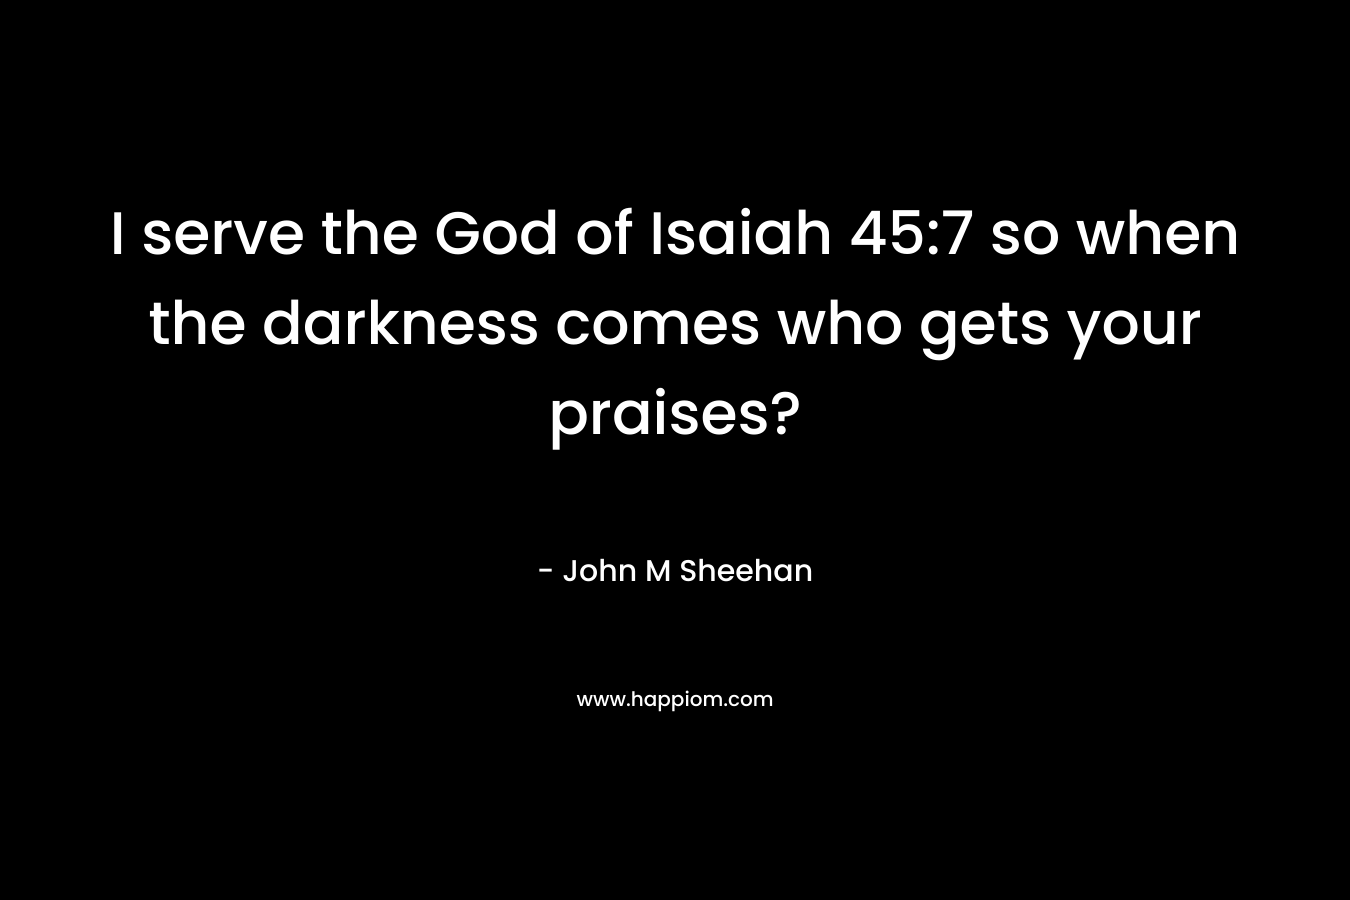 I serve the God of Isaiah 45:7 so when the darkness comes who gets your praises?